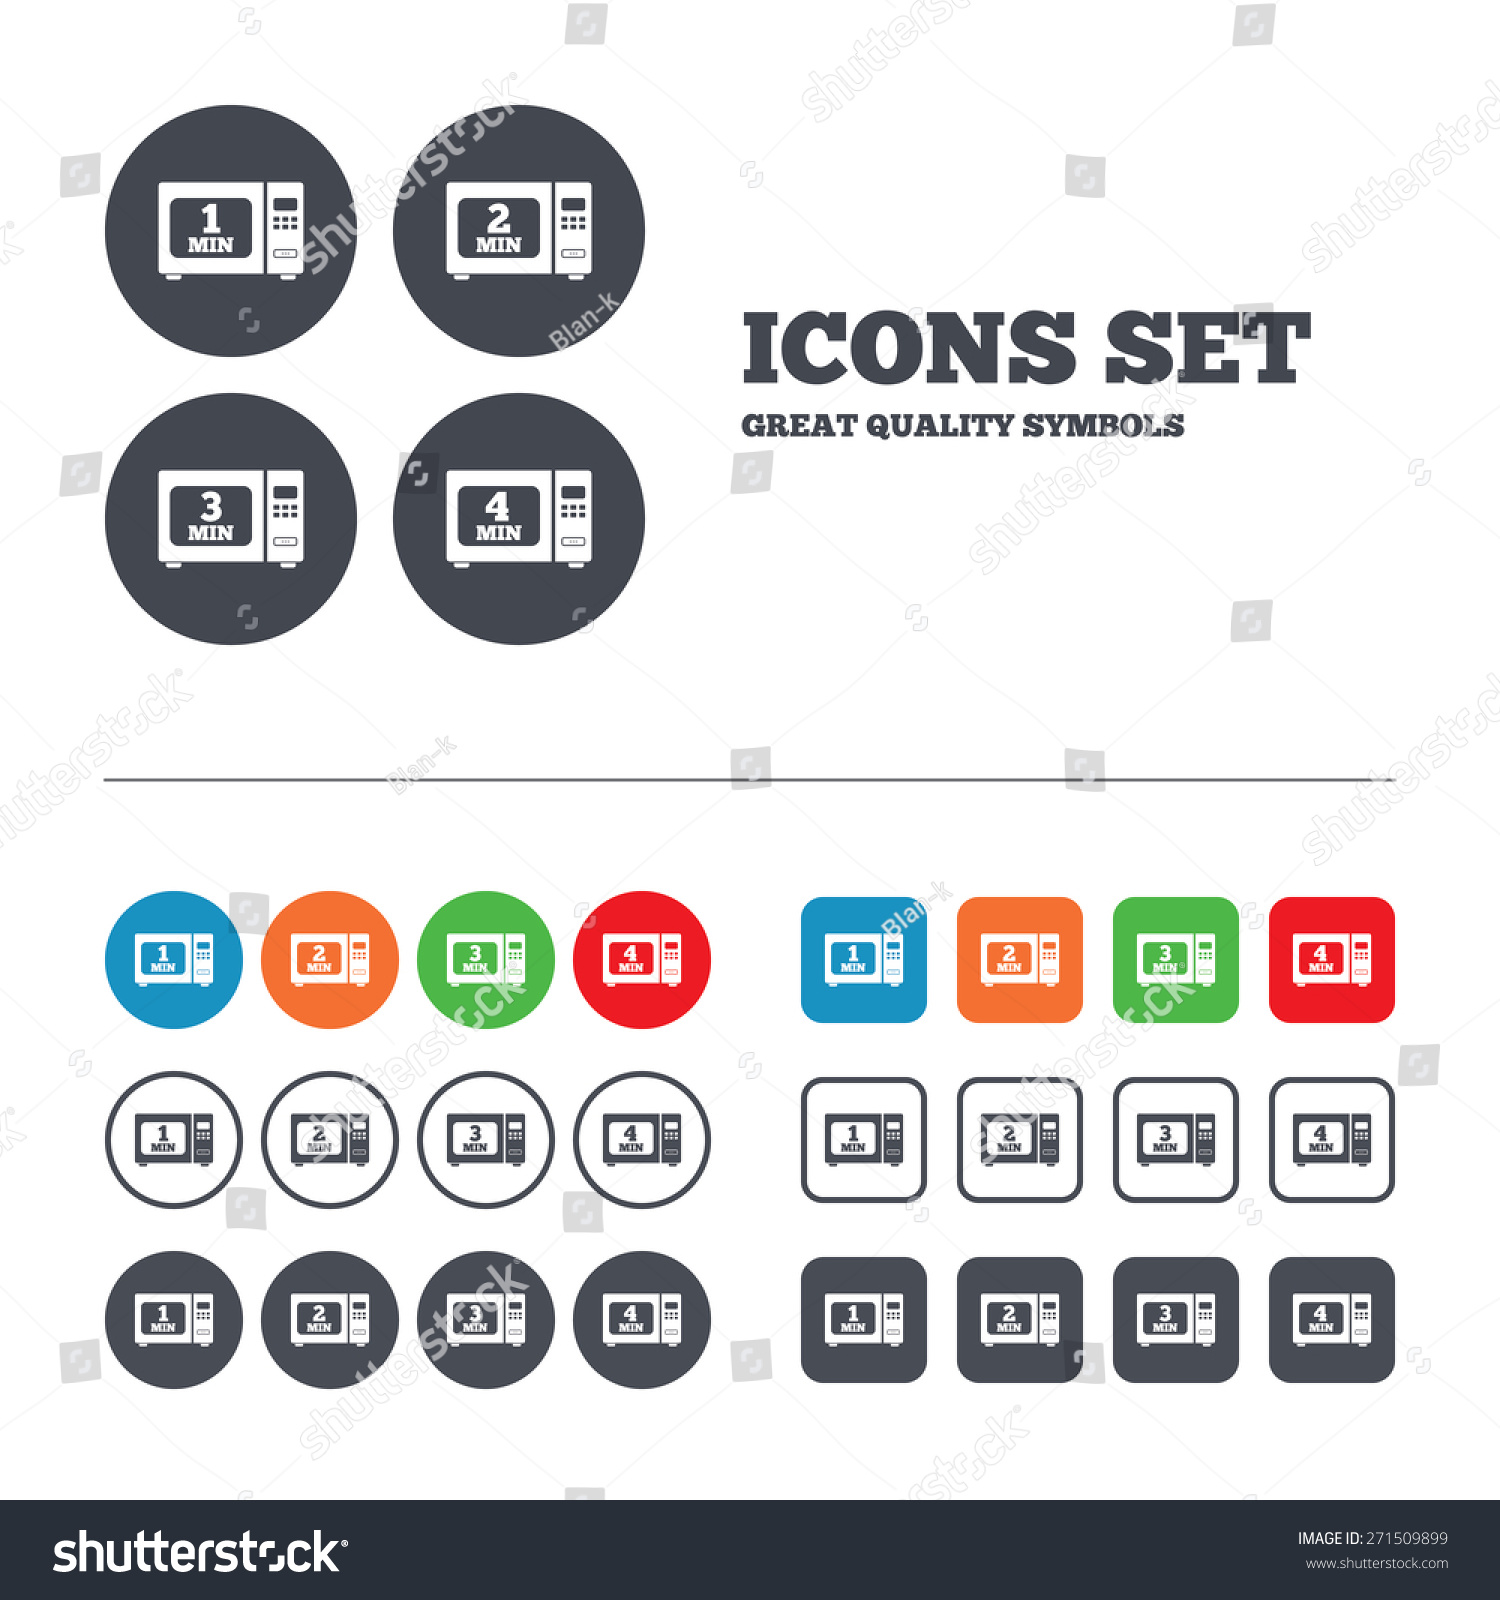 Microwave Oven Icons Cook Electric Stove Stock Vector 271509899 - Shutterstock1500 x 1600